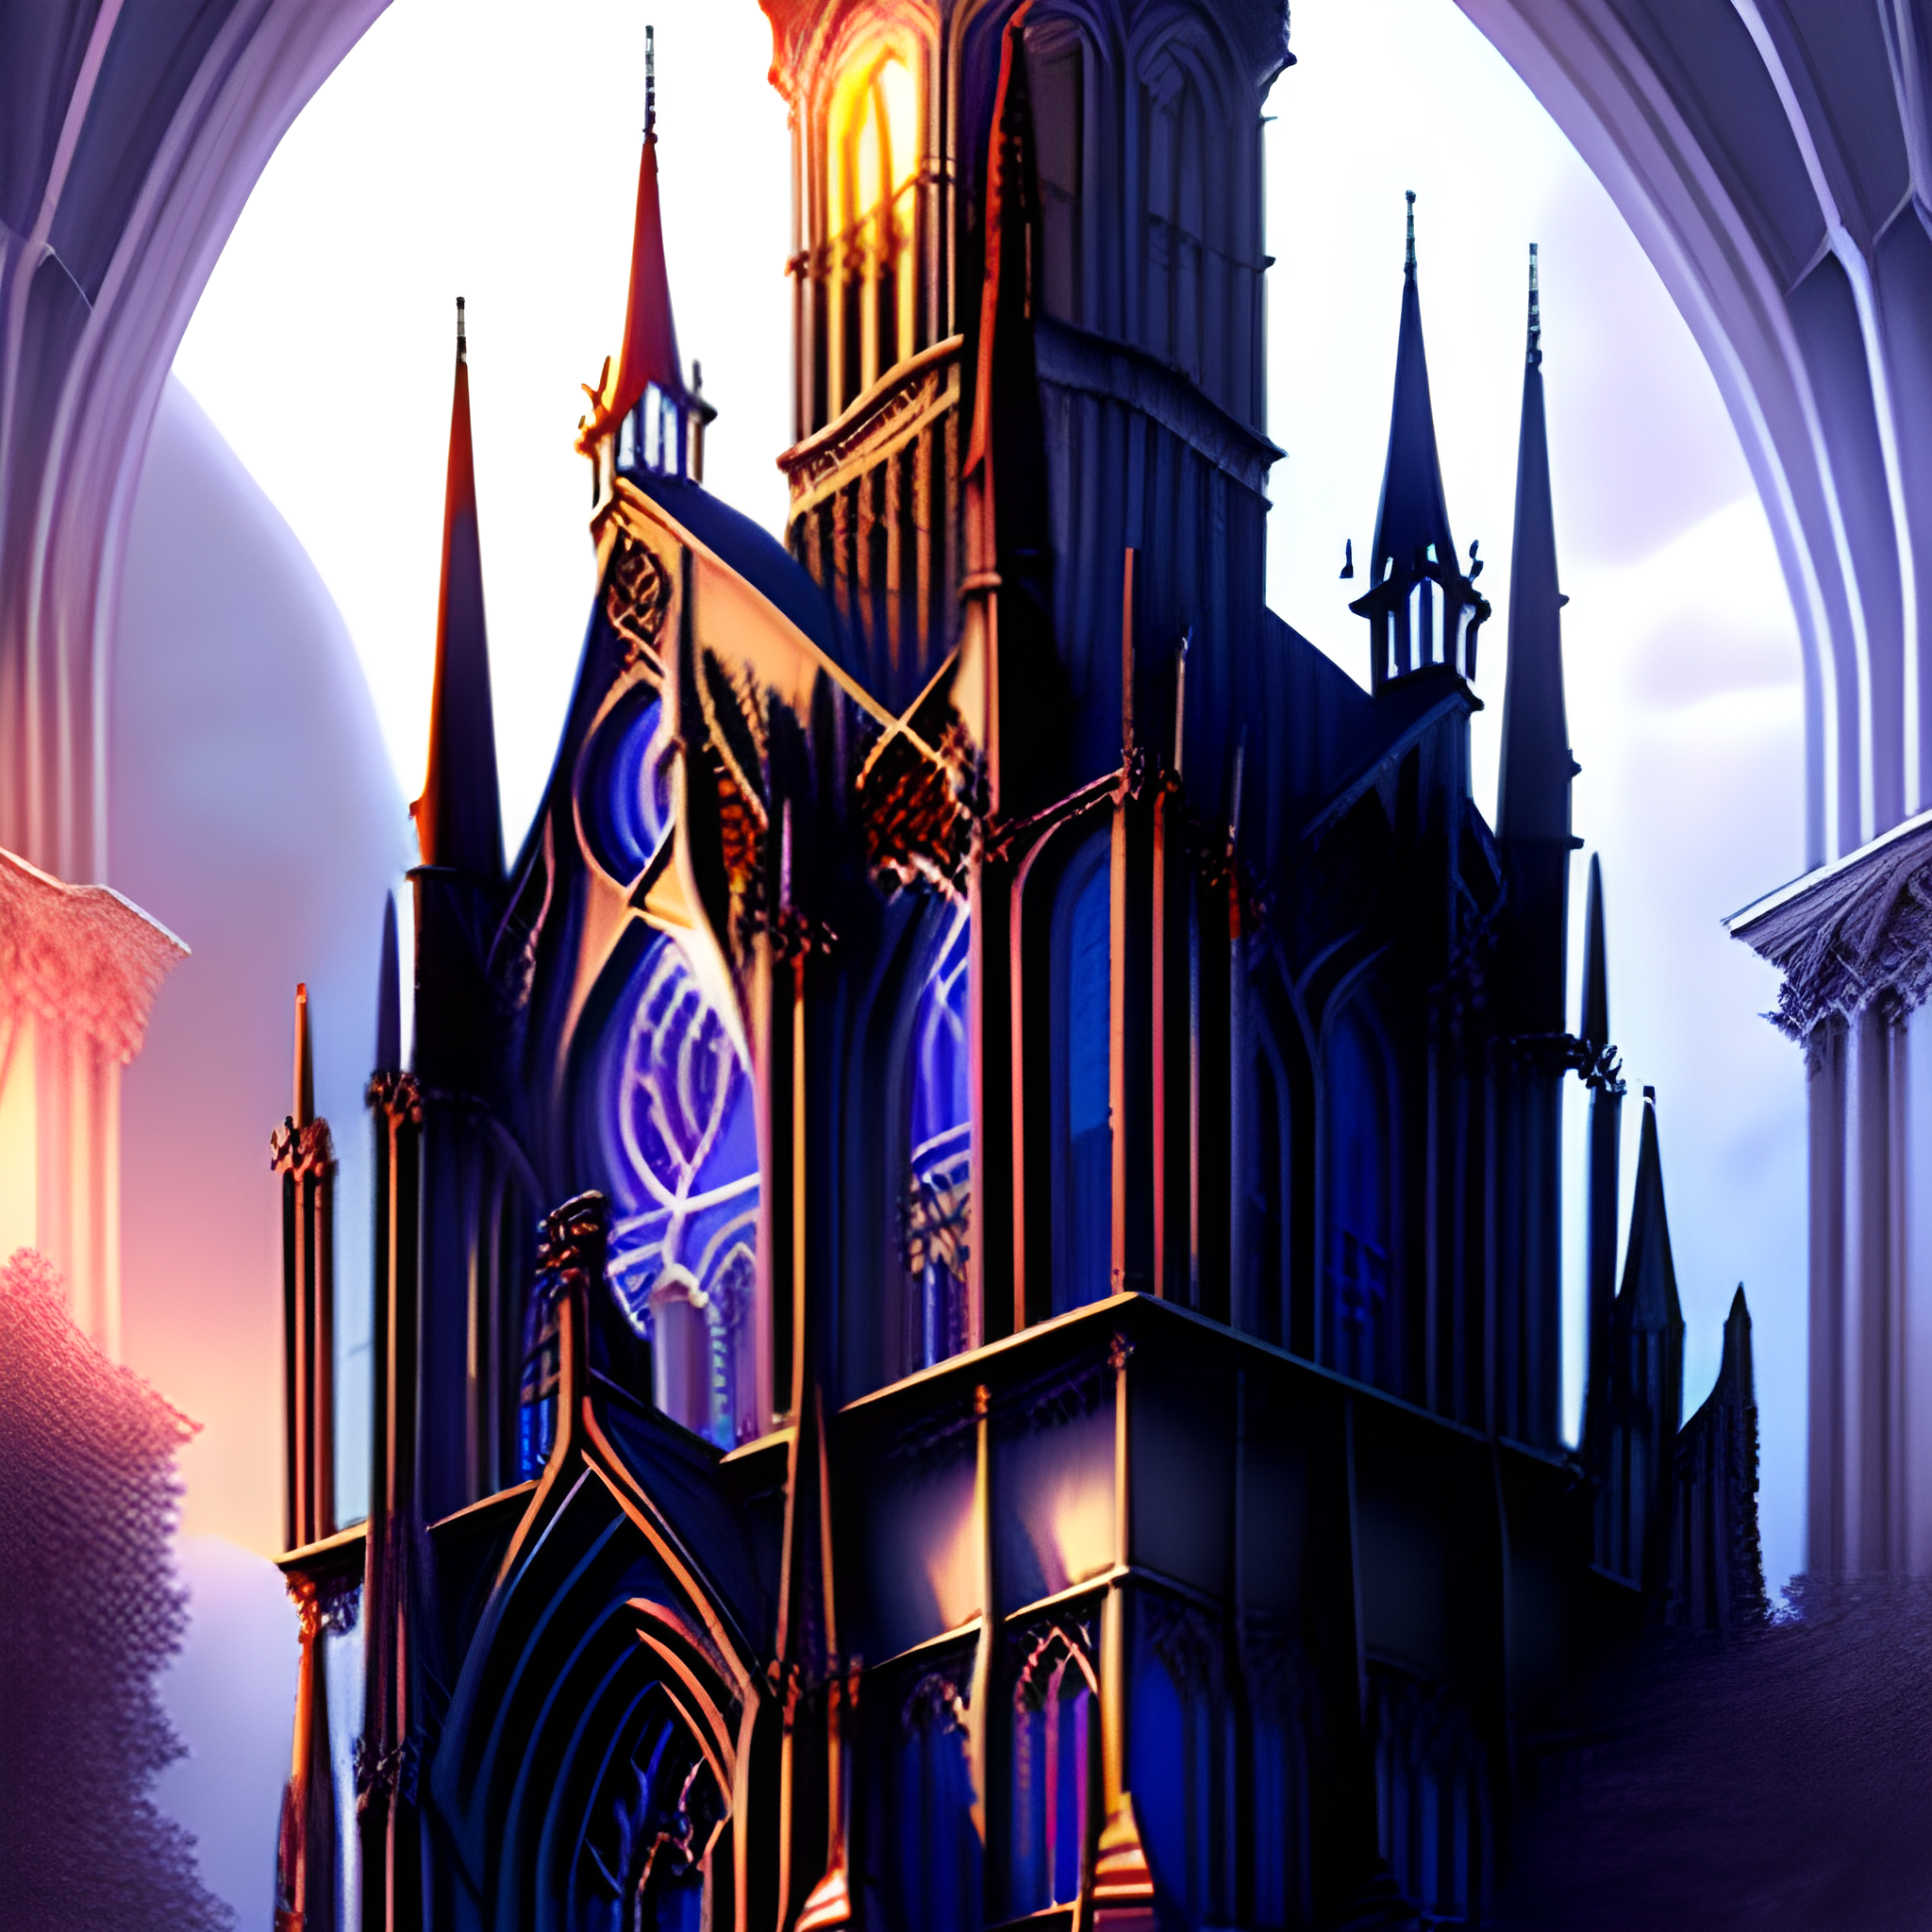 Gothic Art Deco: Cathedral Interior Artistry & 3D Rendering